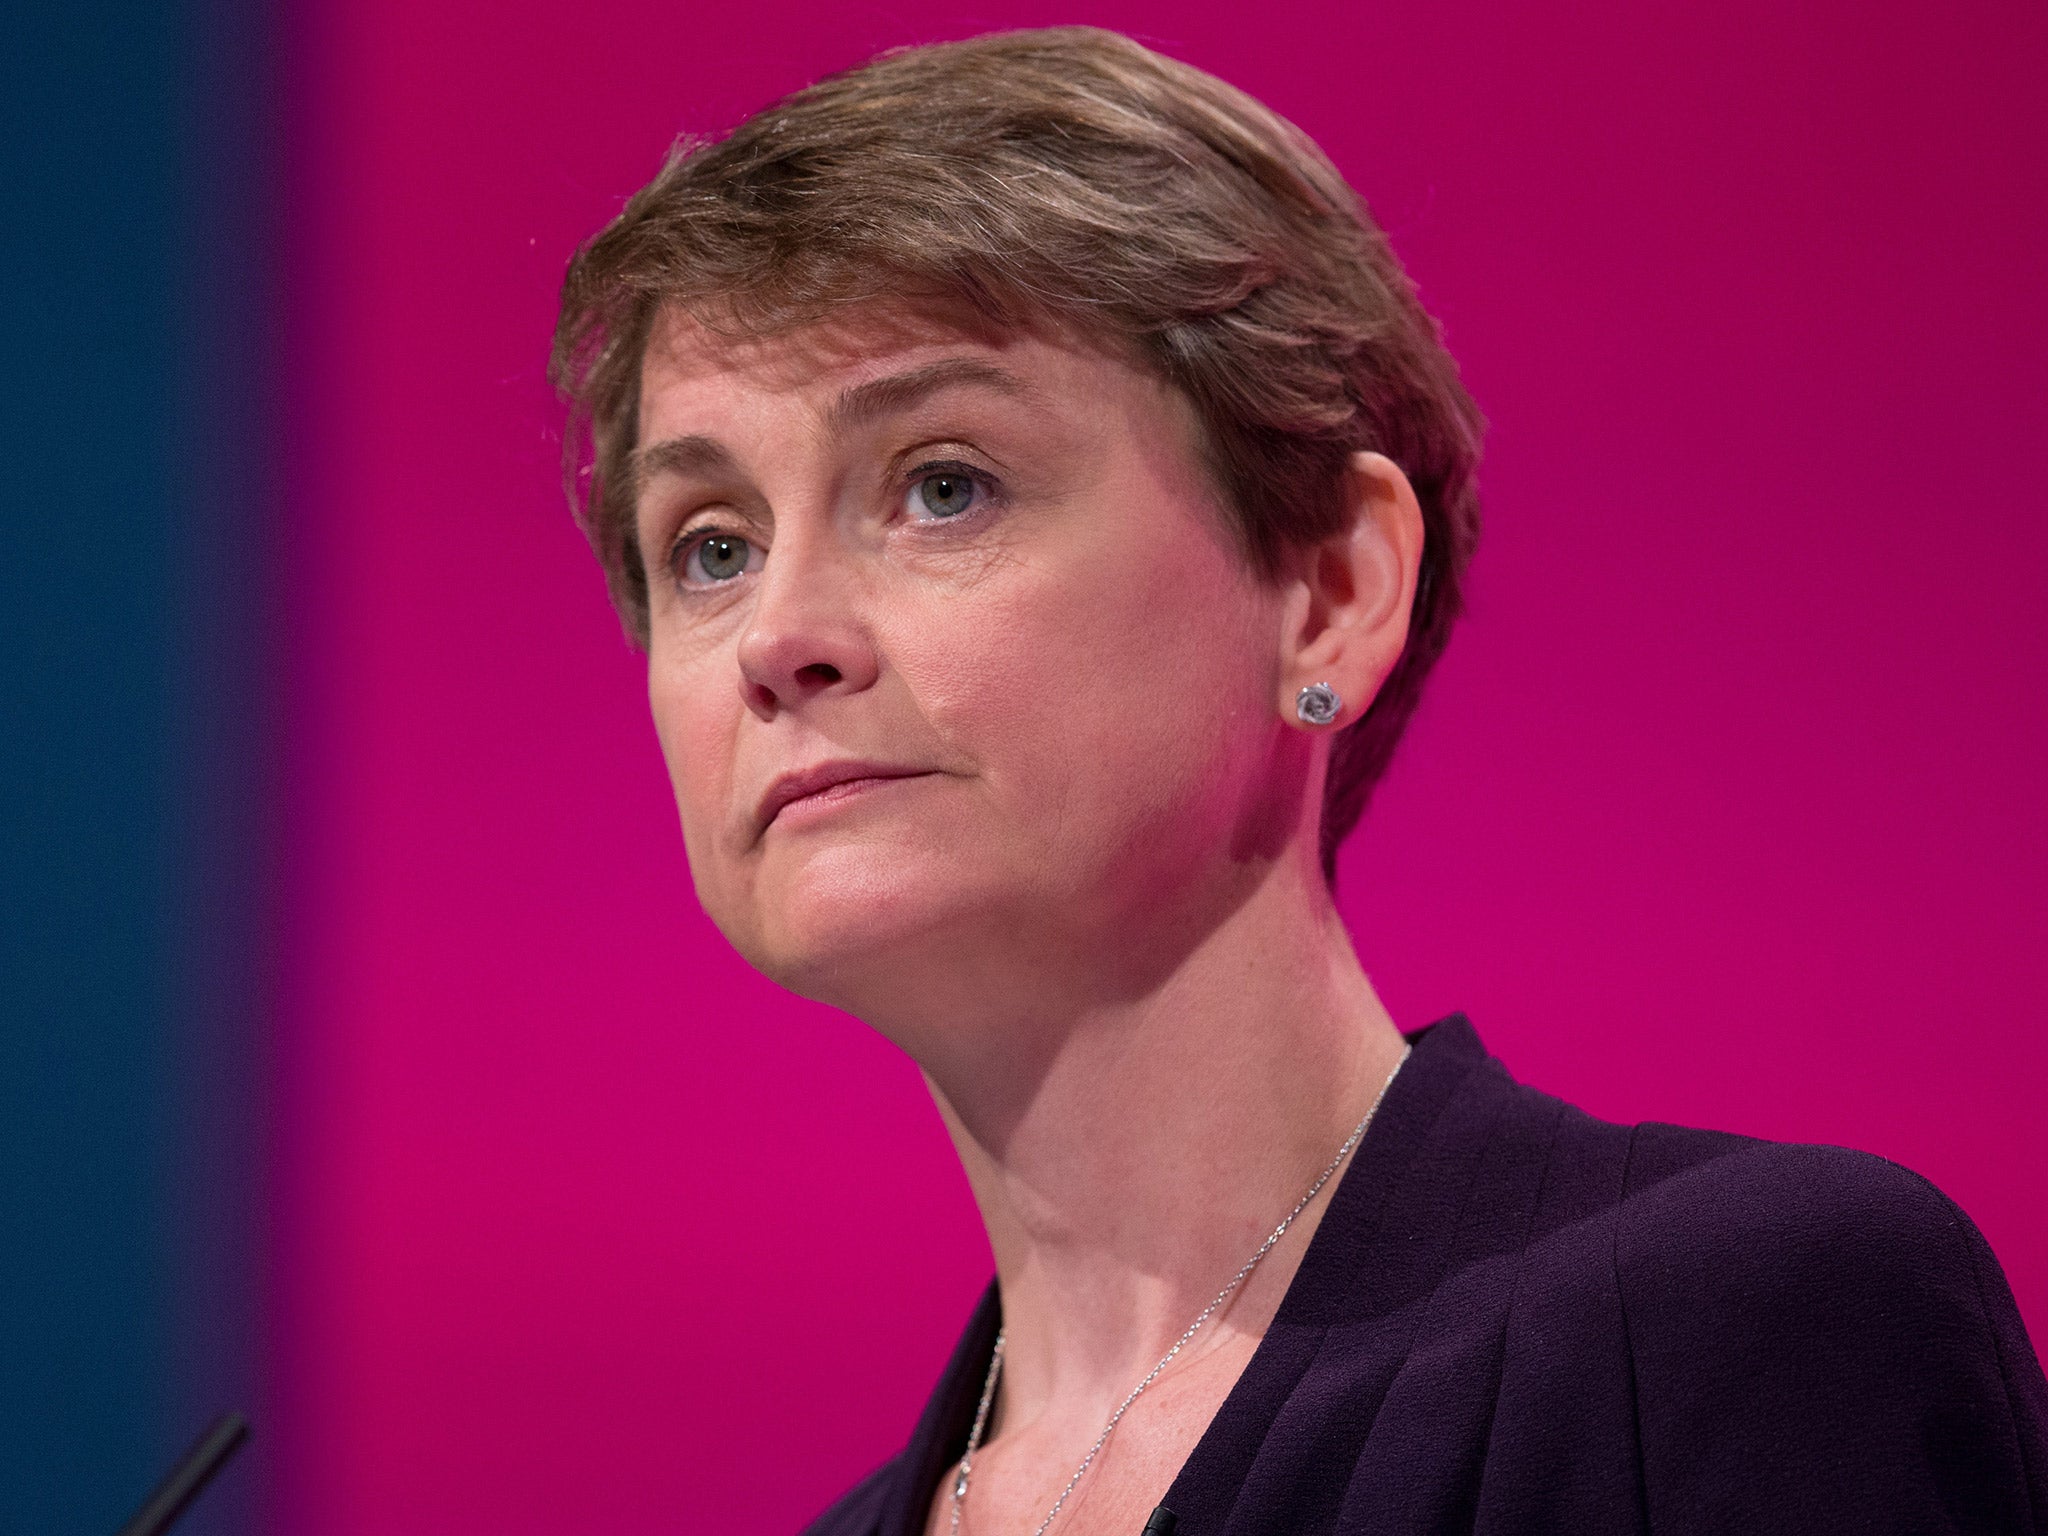 Yvette Cooper S Epiphany Ed Miliband Was Too Anti Business The Independent The Independent